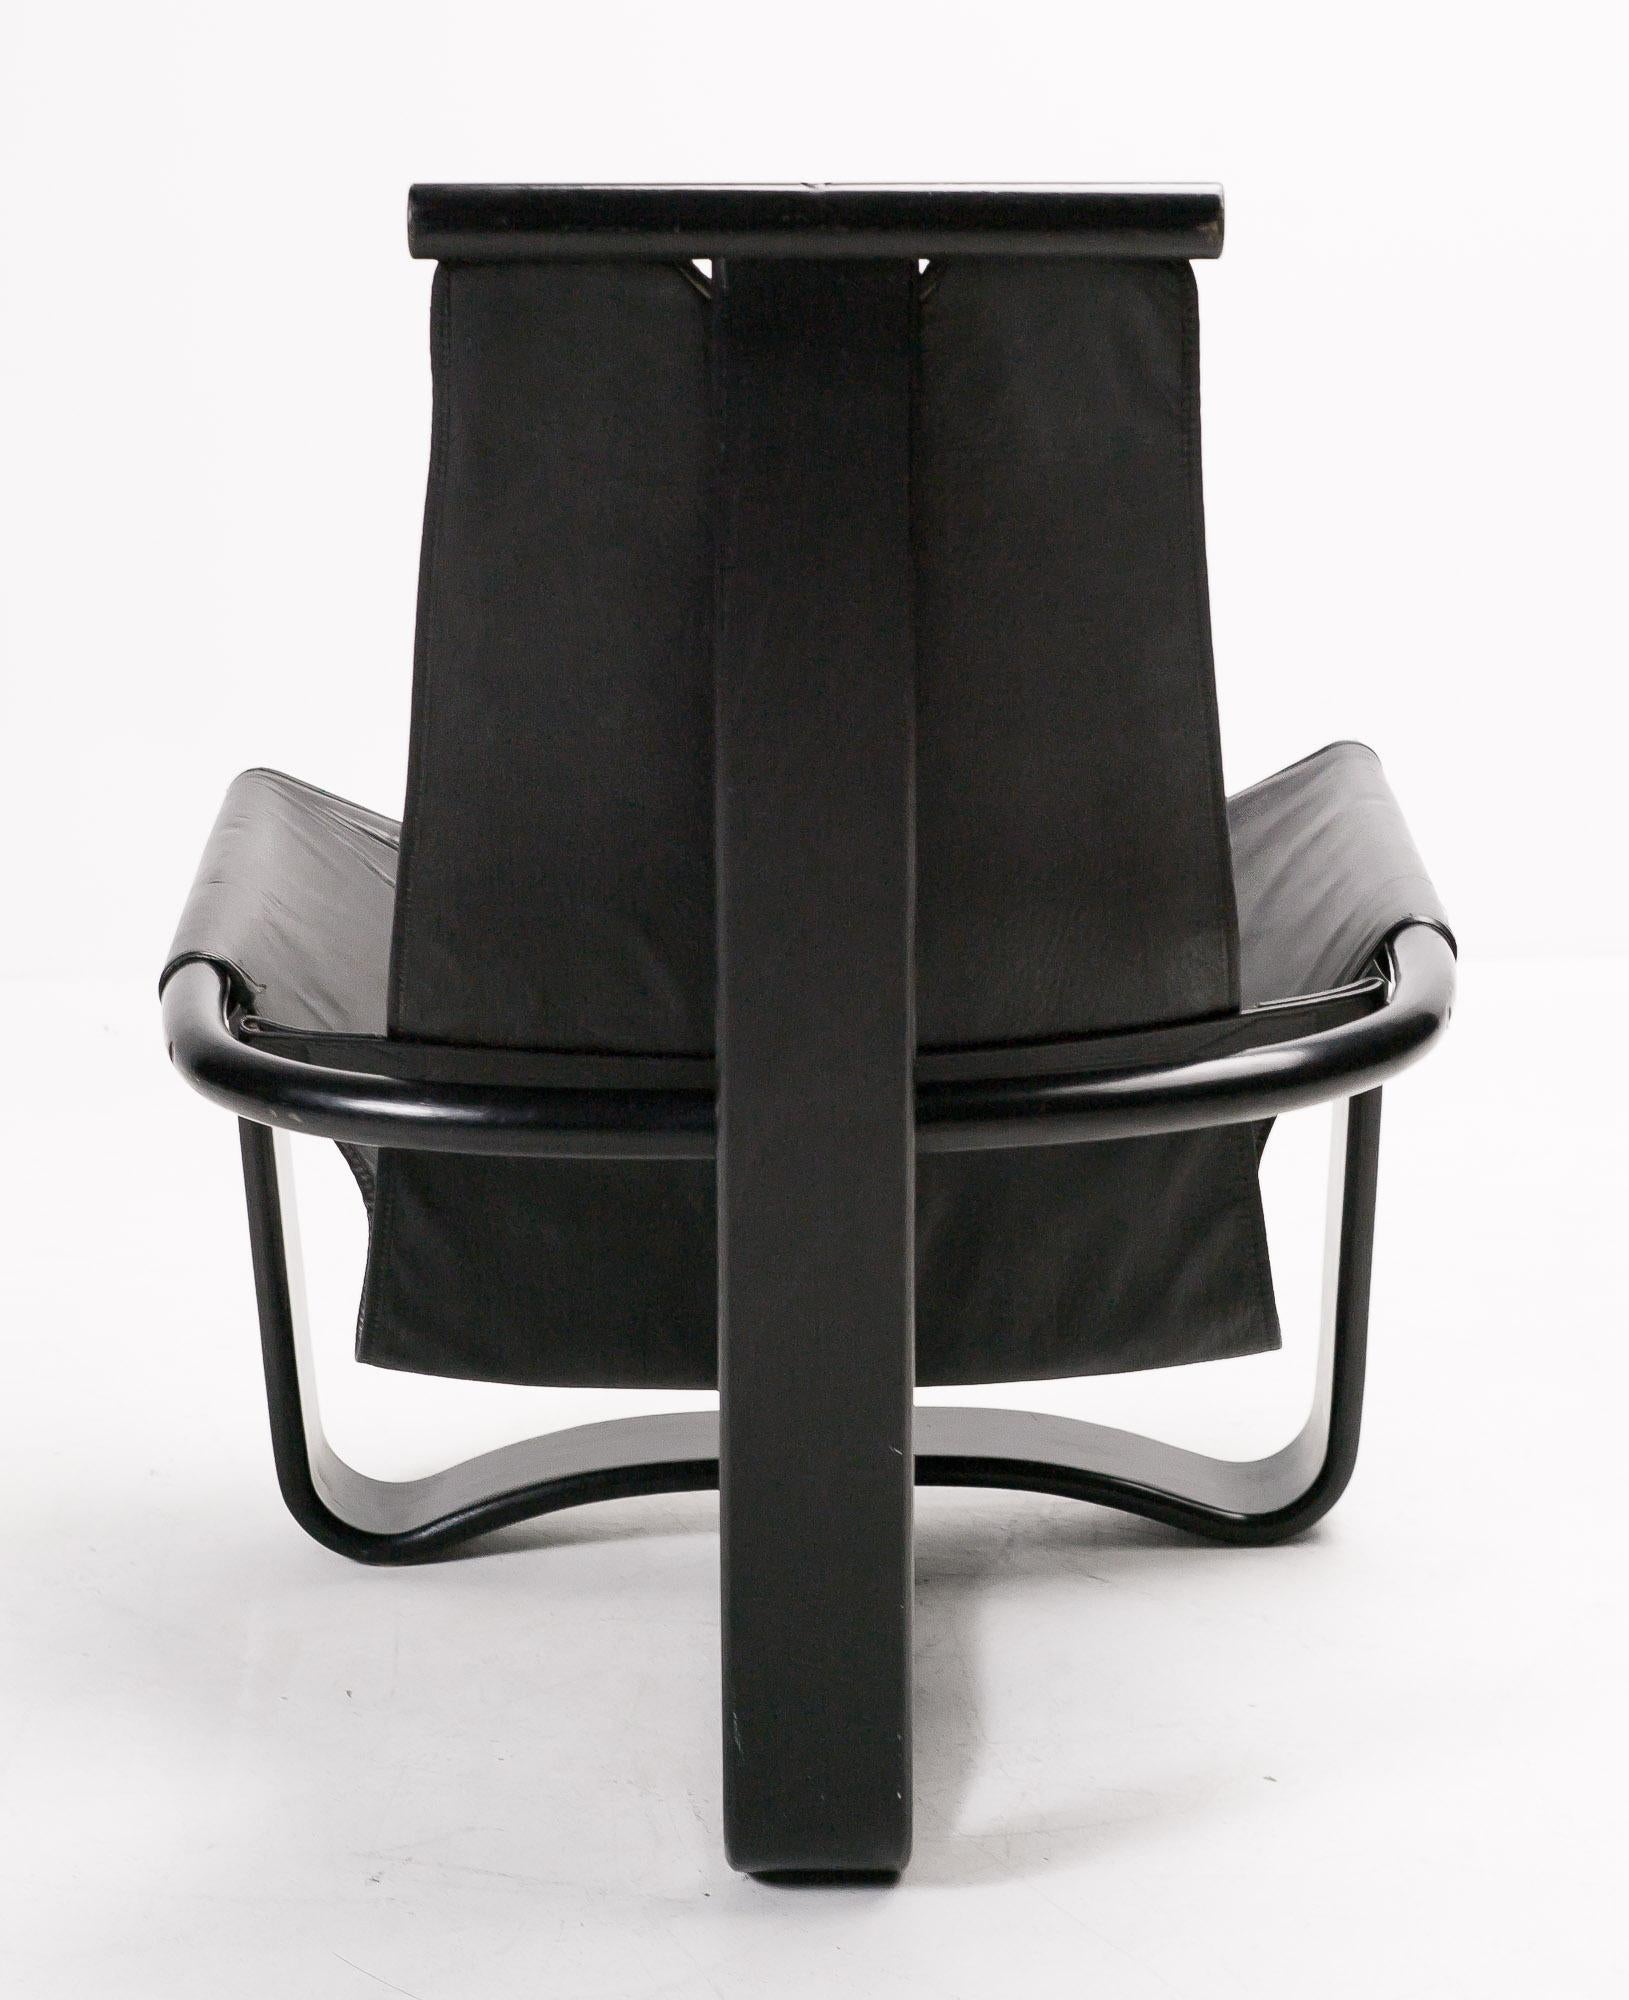 Ingmar Relling for Westnofa Manta high back lounge chair.
Black plywood frame with leather sling upholstery.